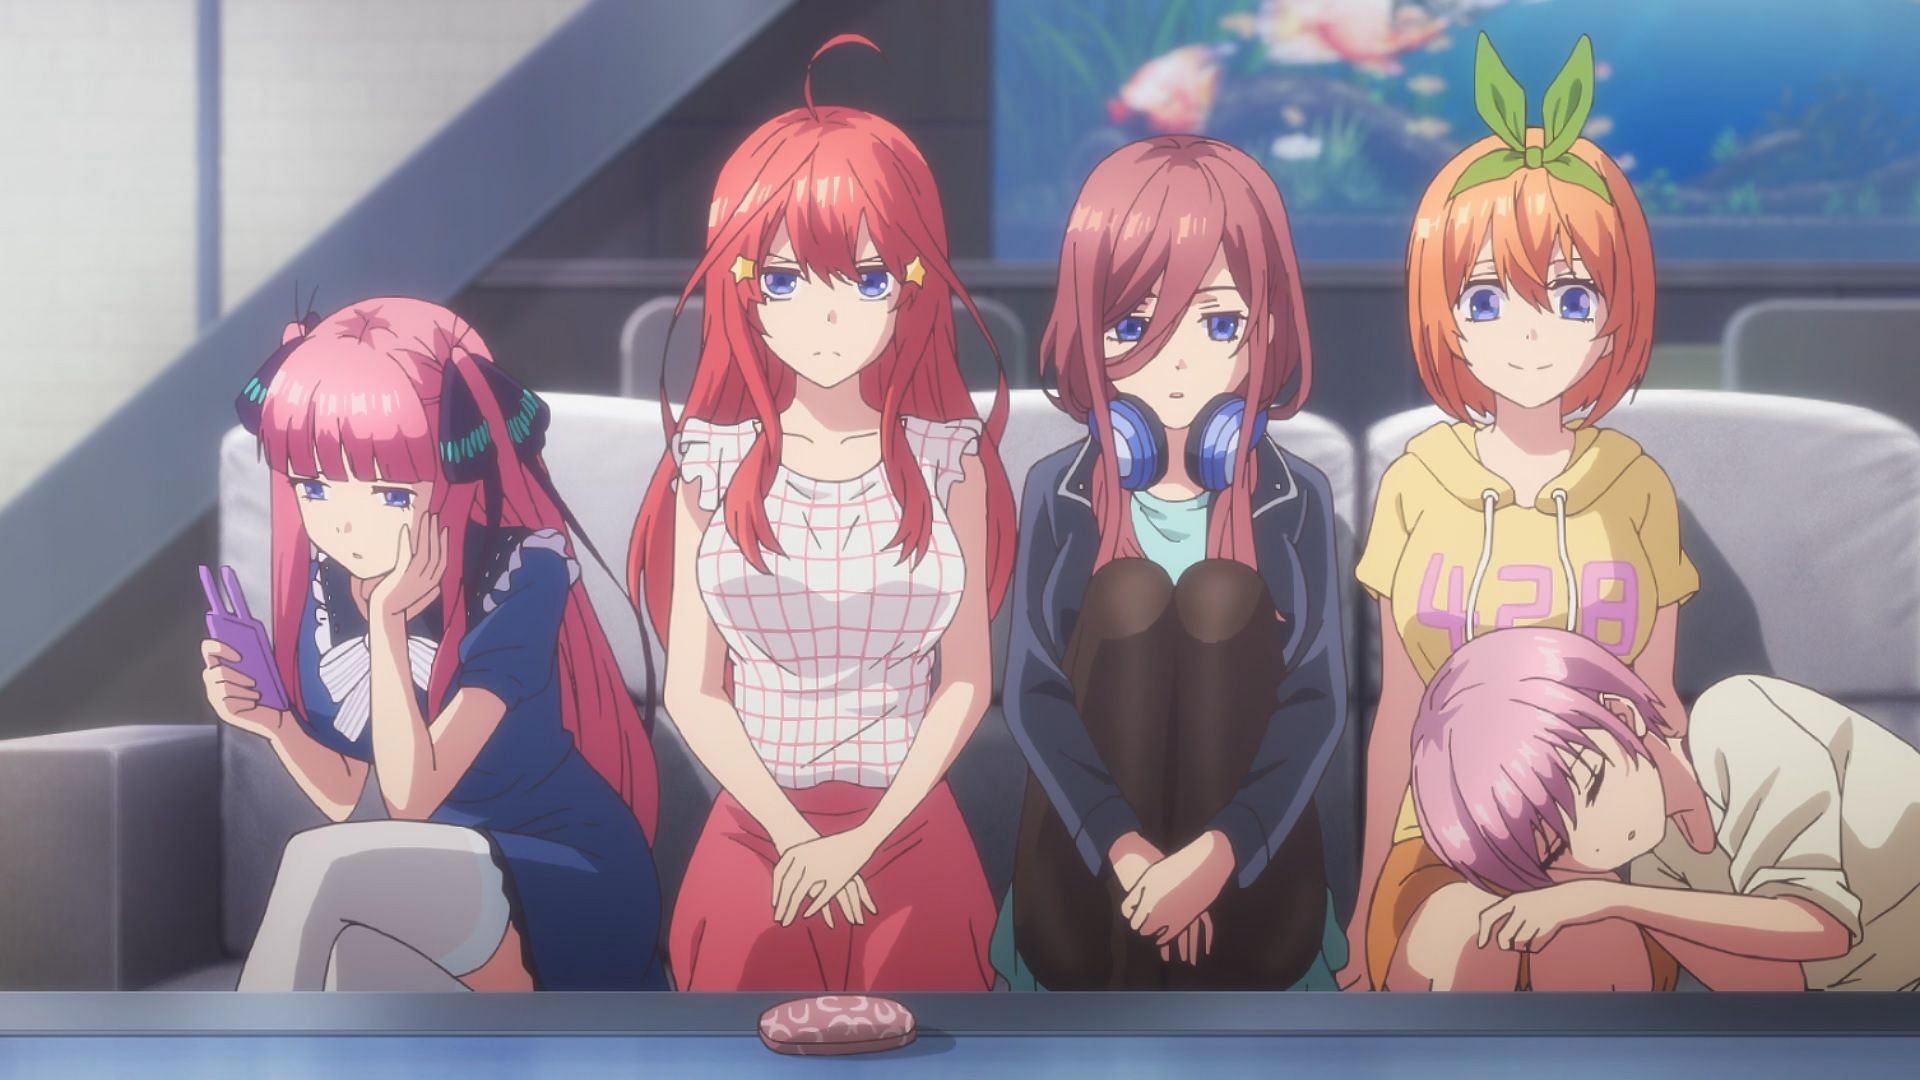 The Quintessential Quintuplets Game Adaptation Announced